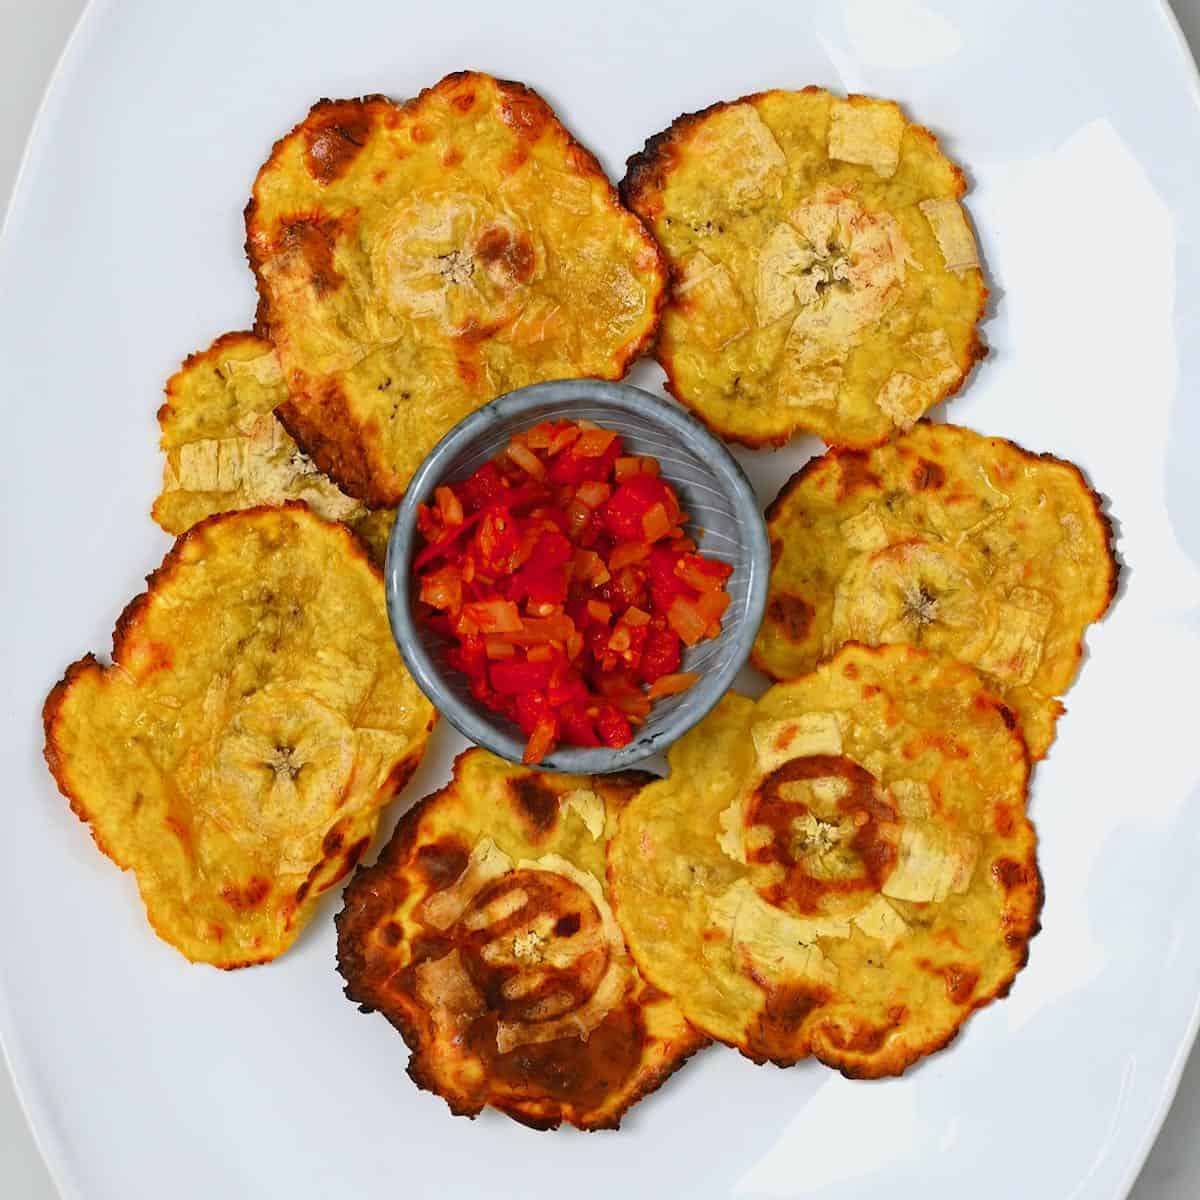 Plantain chips and red salsa